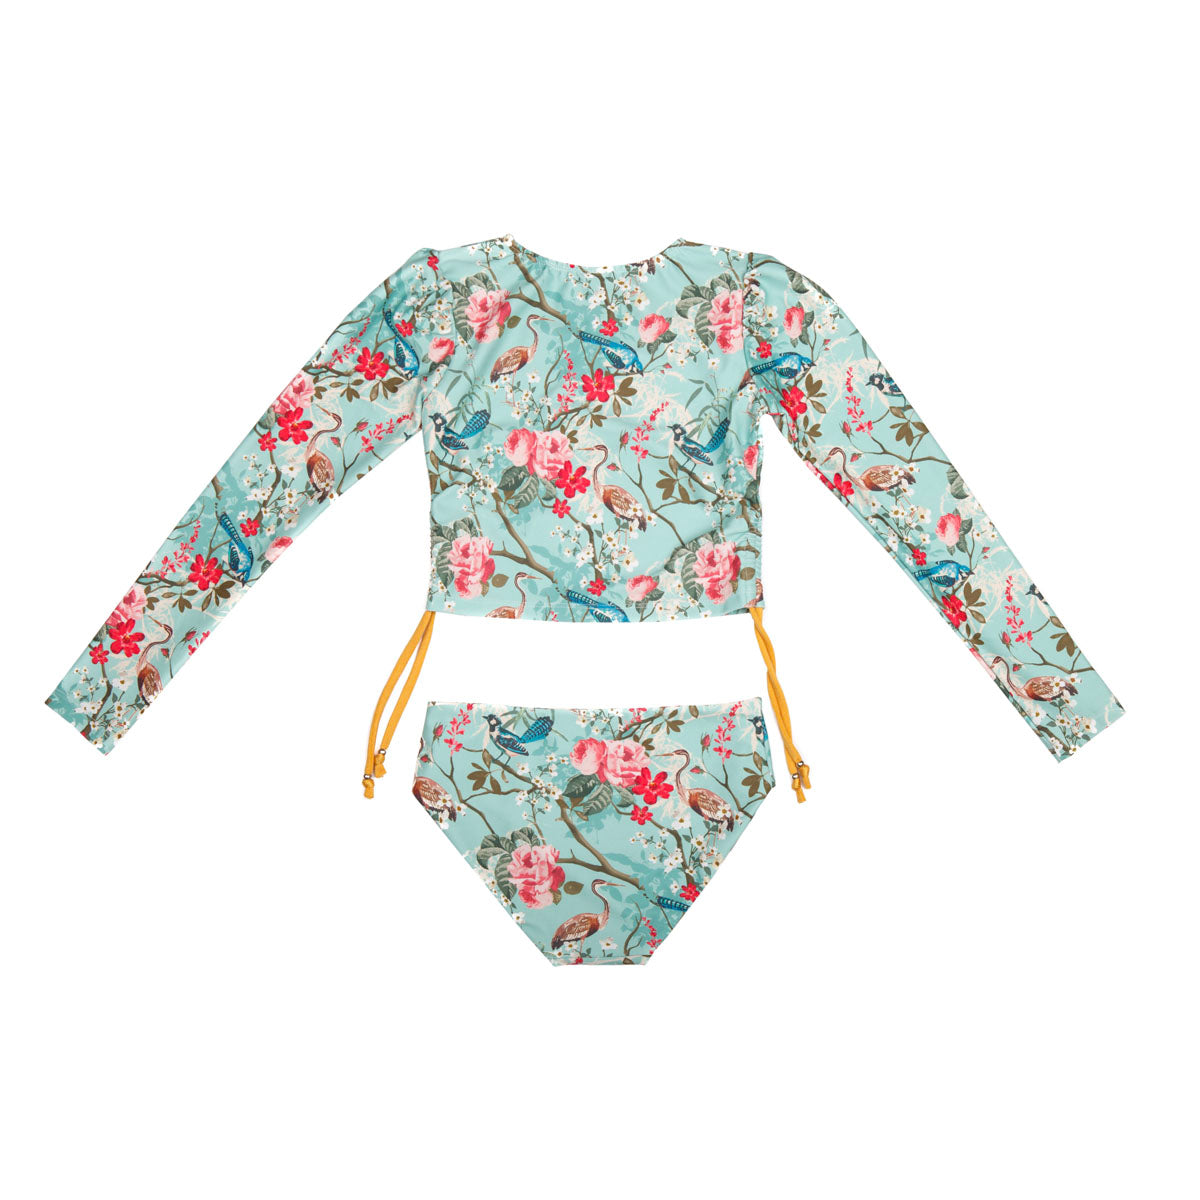 Girls Blue Floral 2 Piece Swimsuit with Side Ties - Back 1